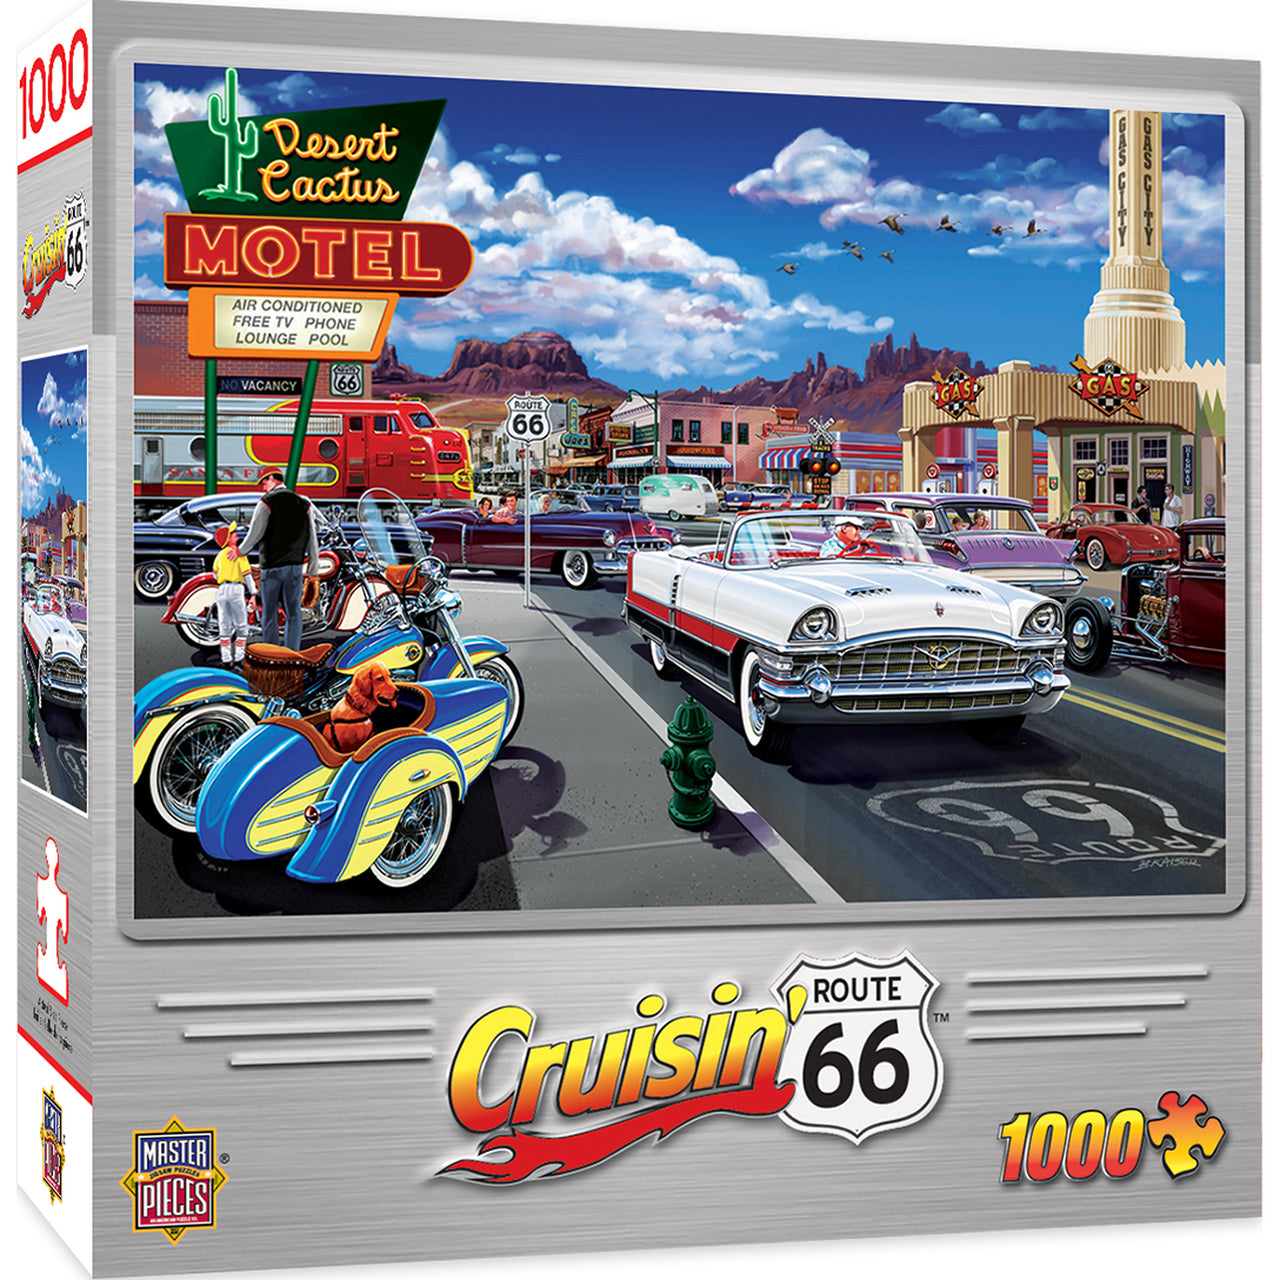 Drive Through on Rt. 66 1000pc Puzzle